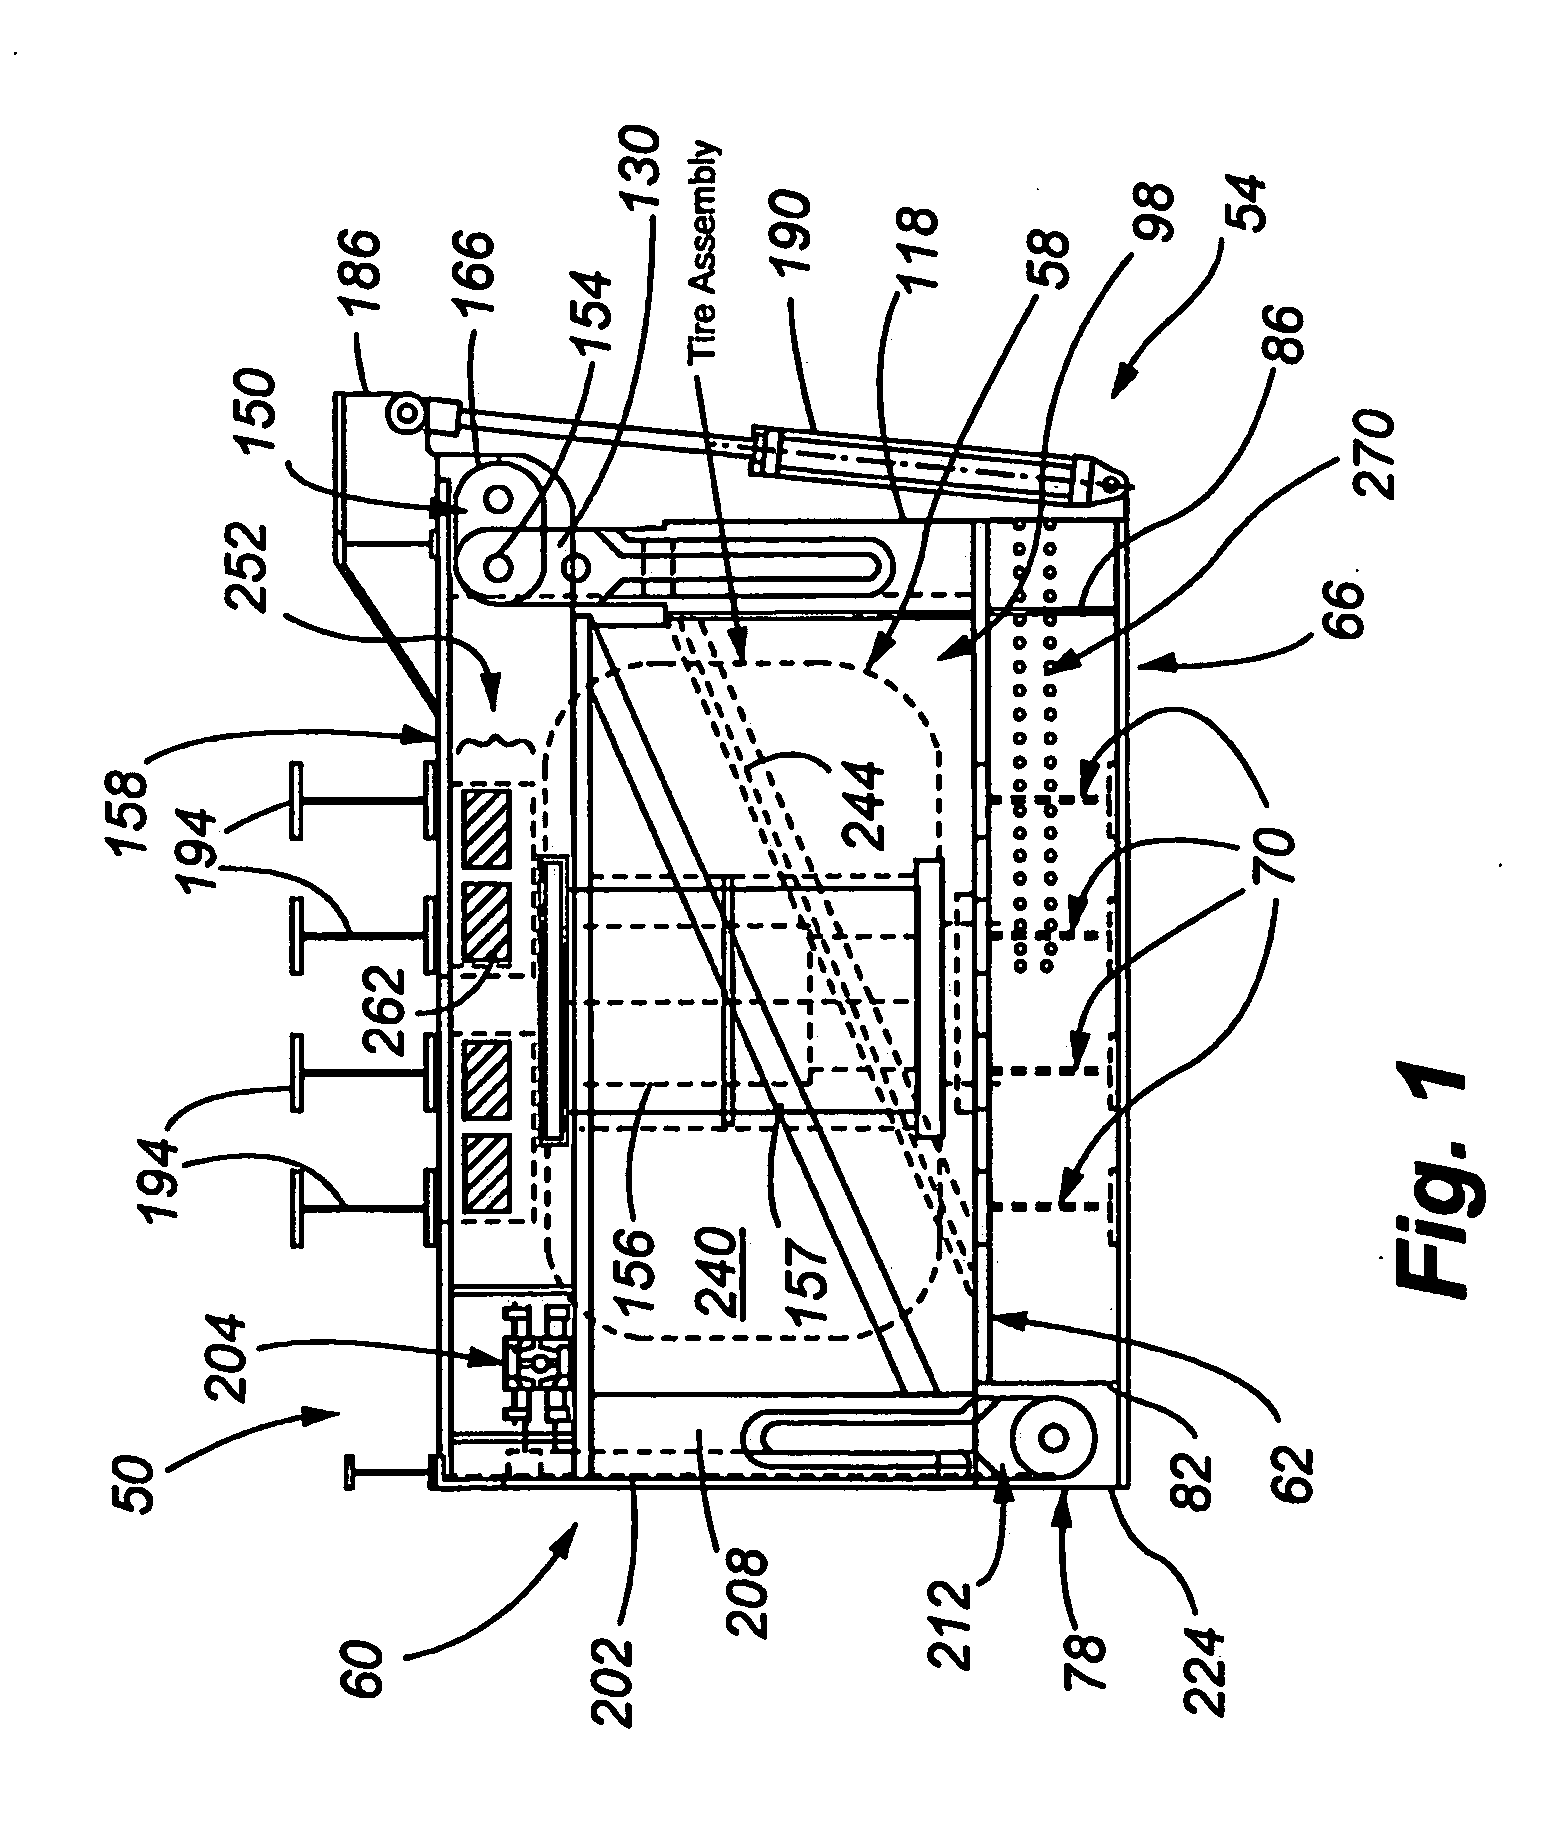 Method of manufacture of an energy absorbing tire cage